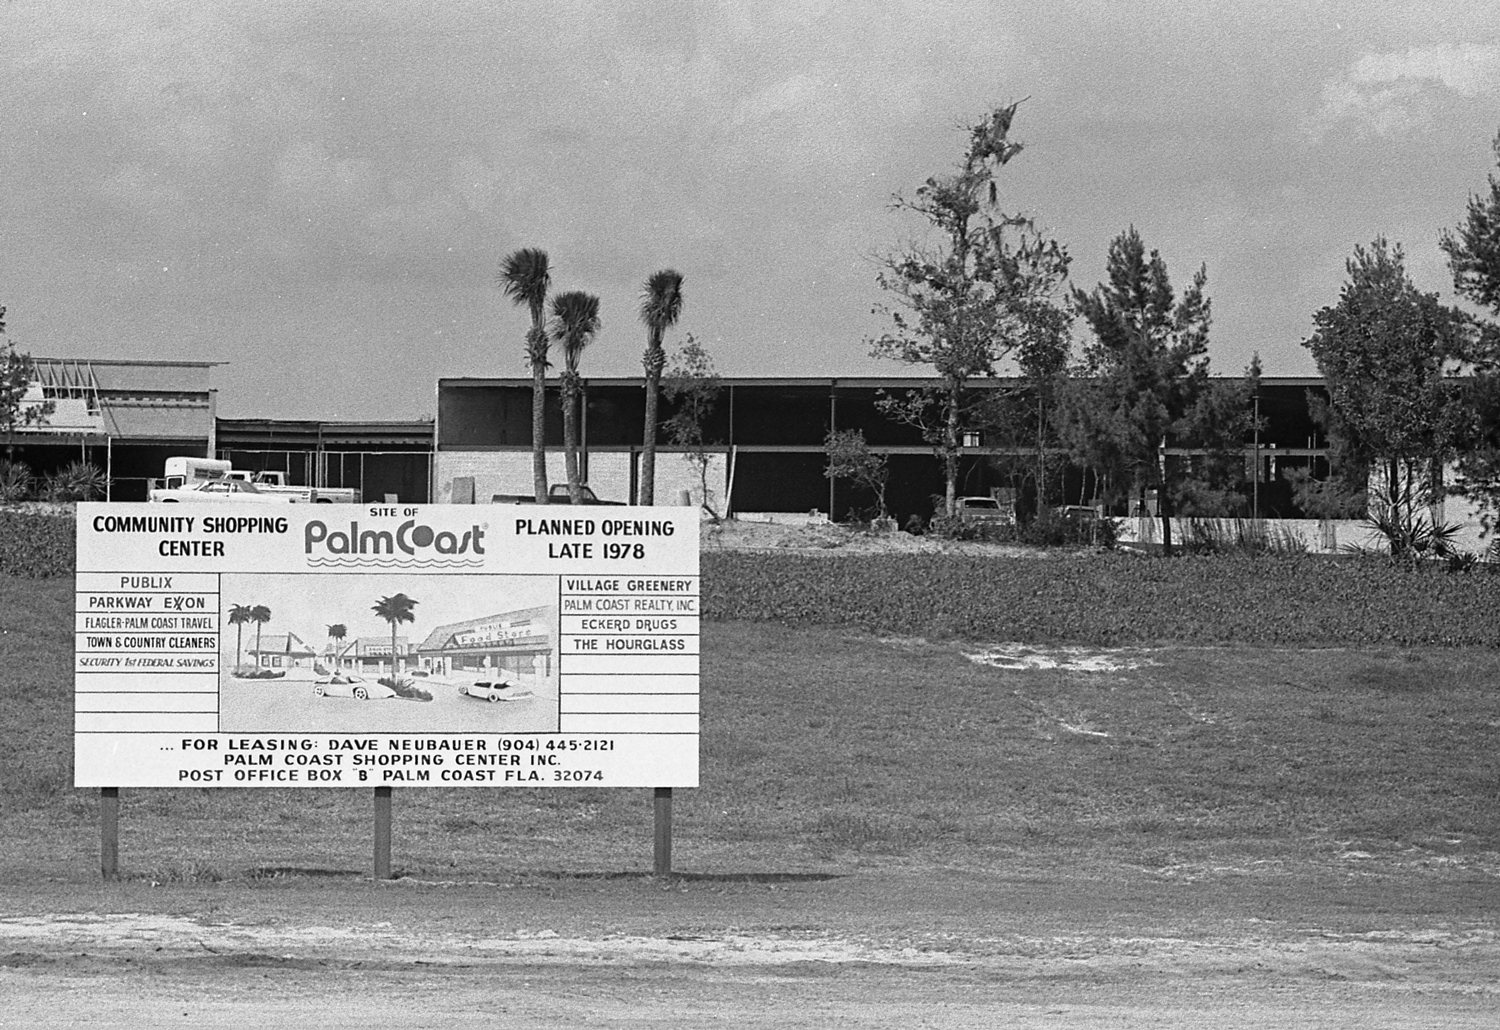 The way we were: the Palm Harbor shopping center in its gestation days. Click on the image for larger view. (Flagler County Historical Society)